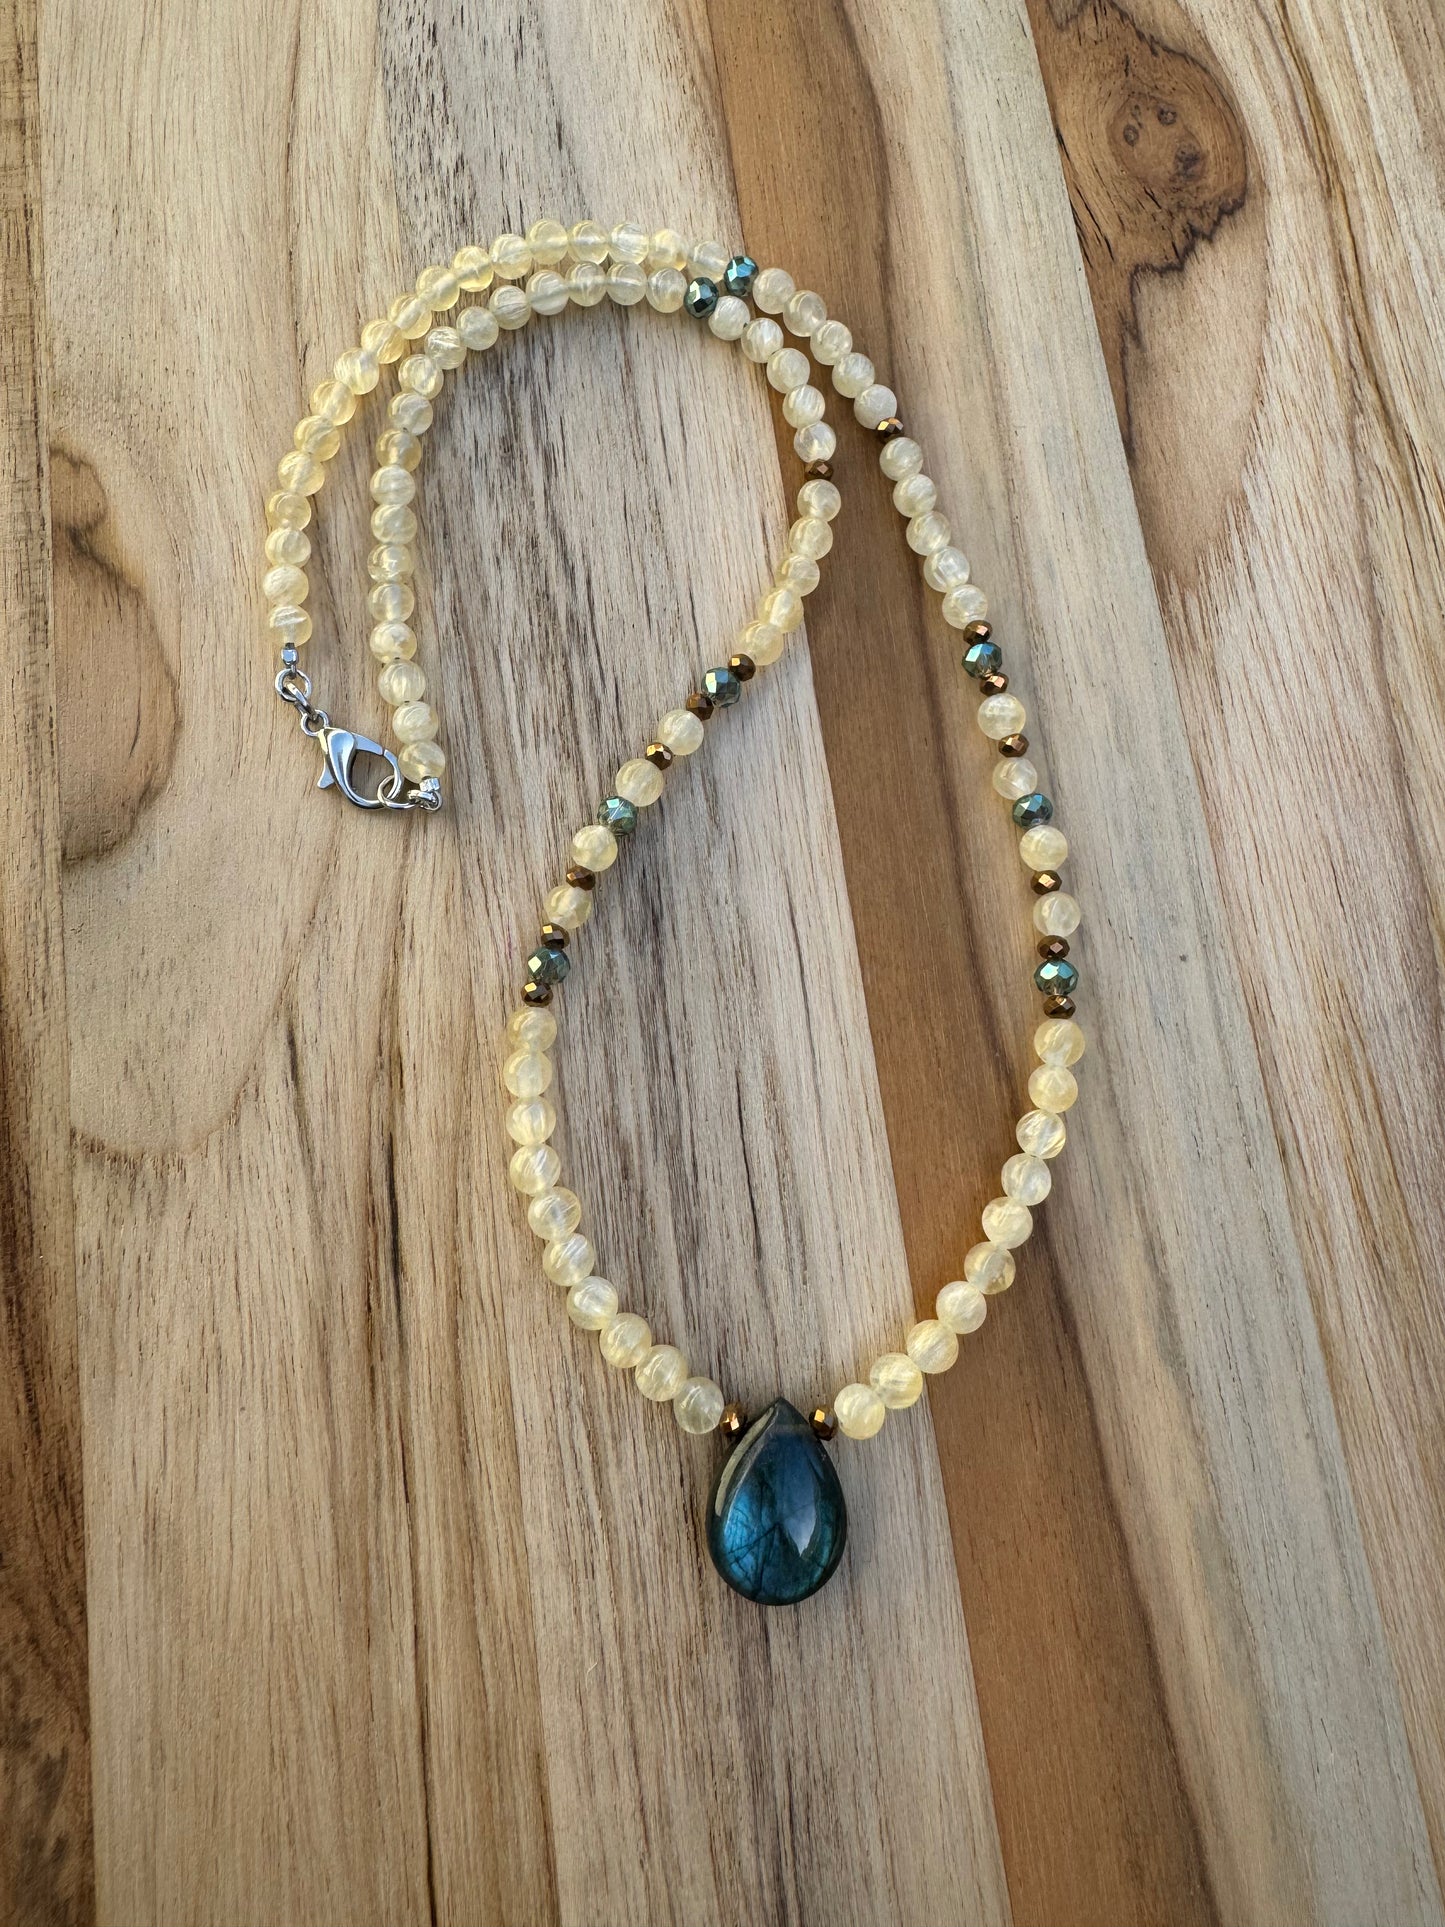 Dainty Labradorite Pendant Necklace with Yellow Selenite And Crystal Beads